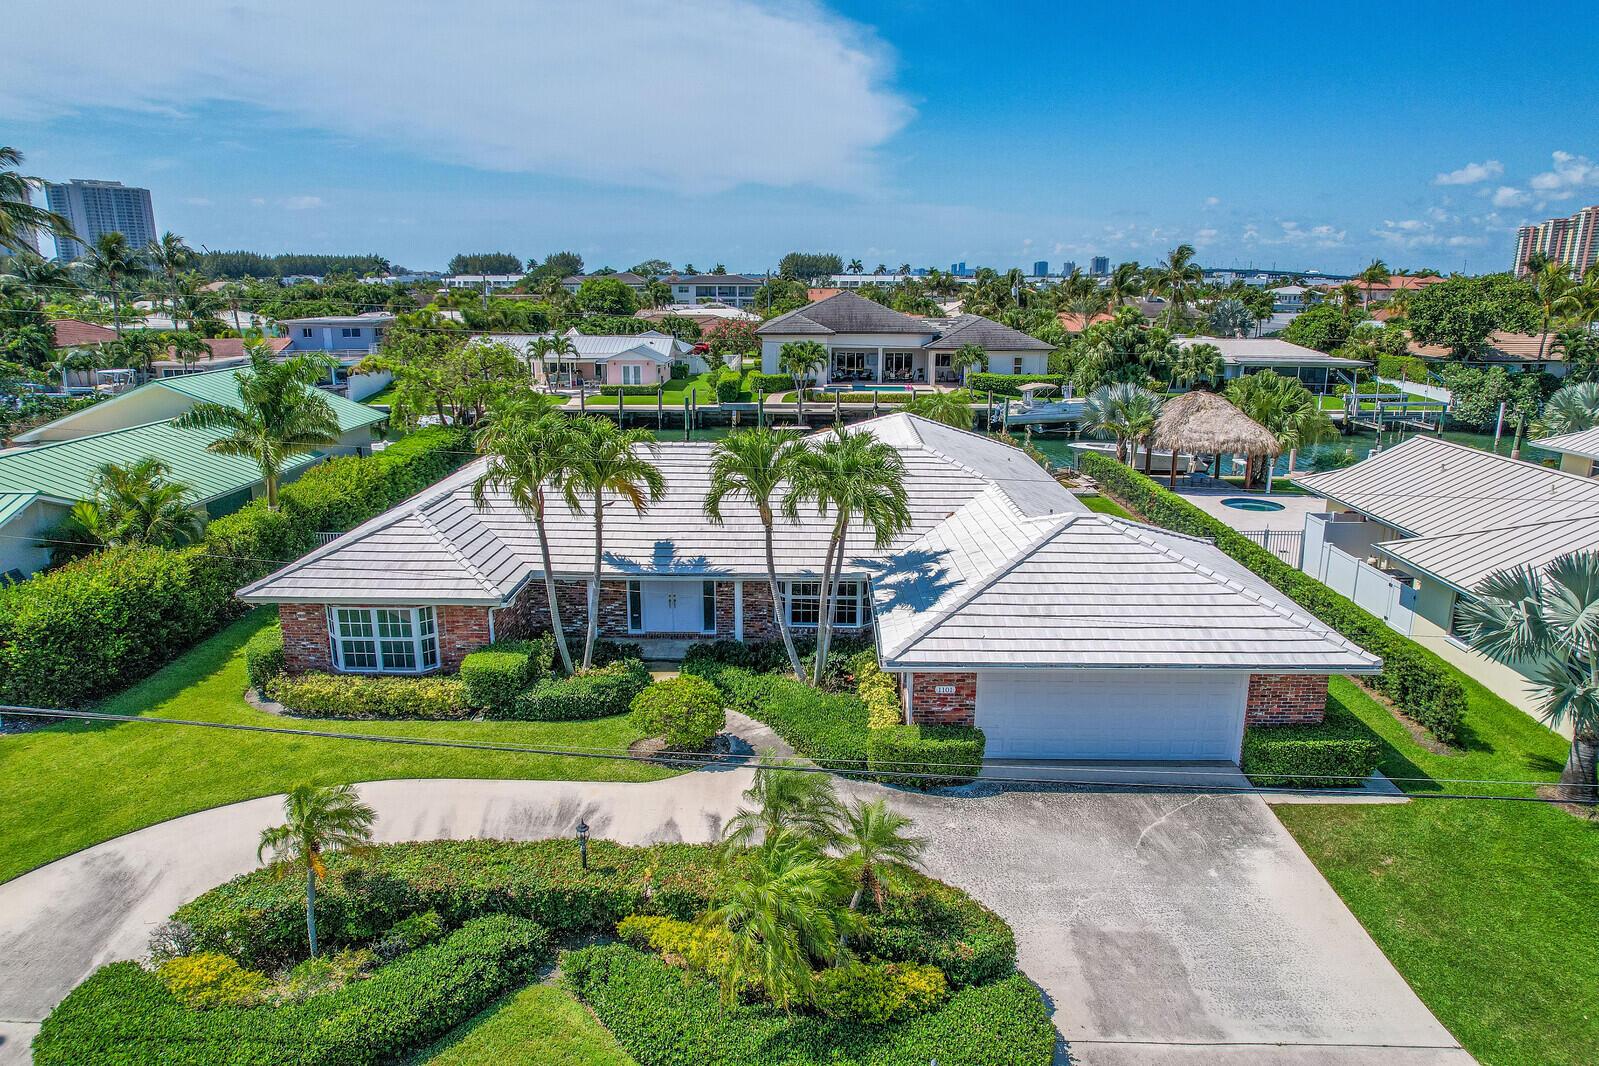 DO NOT miss this rare opportunity! Prime waterfront location on beautiful Singer Island offering 100 feet of water frontage on the best deep water canal on Singer Island as well as a lot depth of 131 feet, making it one of the largest lots in the area, and the highly sought-after southern exposure for your pool and back yard enjoyment. Located 9 homes in from the Intercoastal waterway this location provides easy access to Lake Worth Inlet and NO fixed bridges. A NEW vinyl sheathing seawall with cap is fully contracted with deposit in place and awaiting materials. The expected completion of seawall is Fall of 2023 and is included in the sale price. The existing home was built in 1972 with 2809 square feet under air and a large 715 square foot finished rear porch and is ready for your